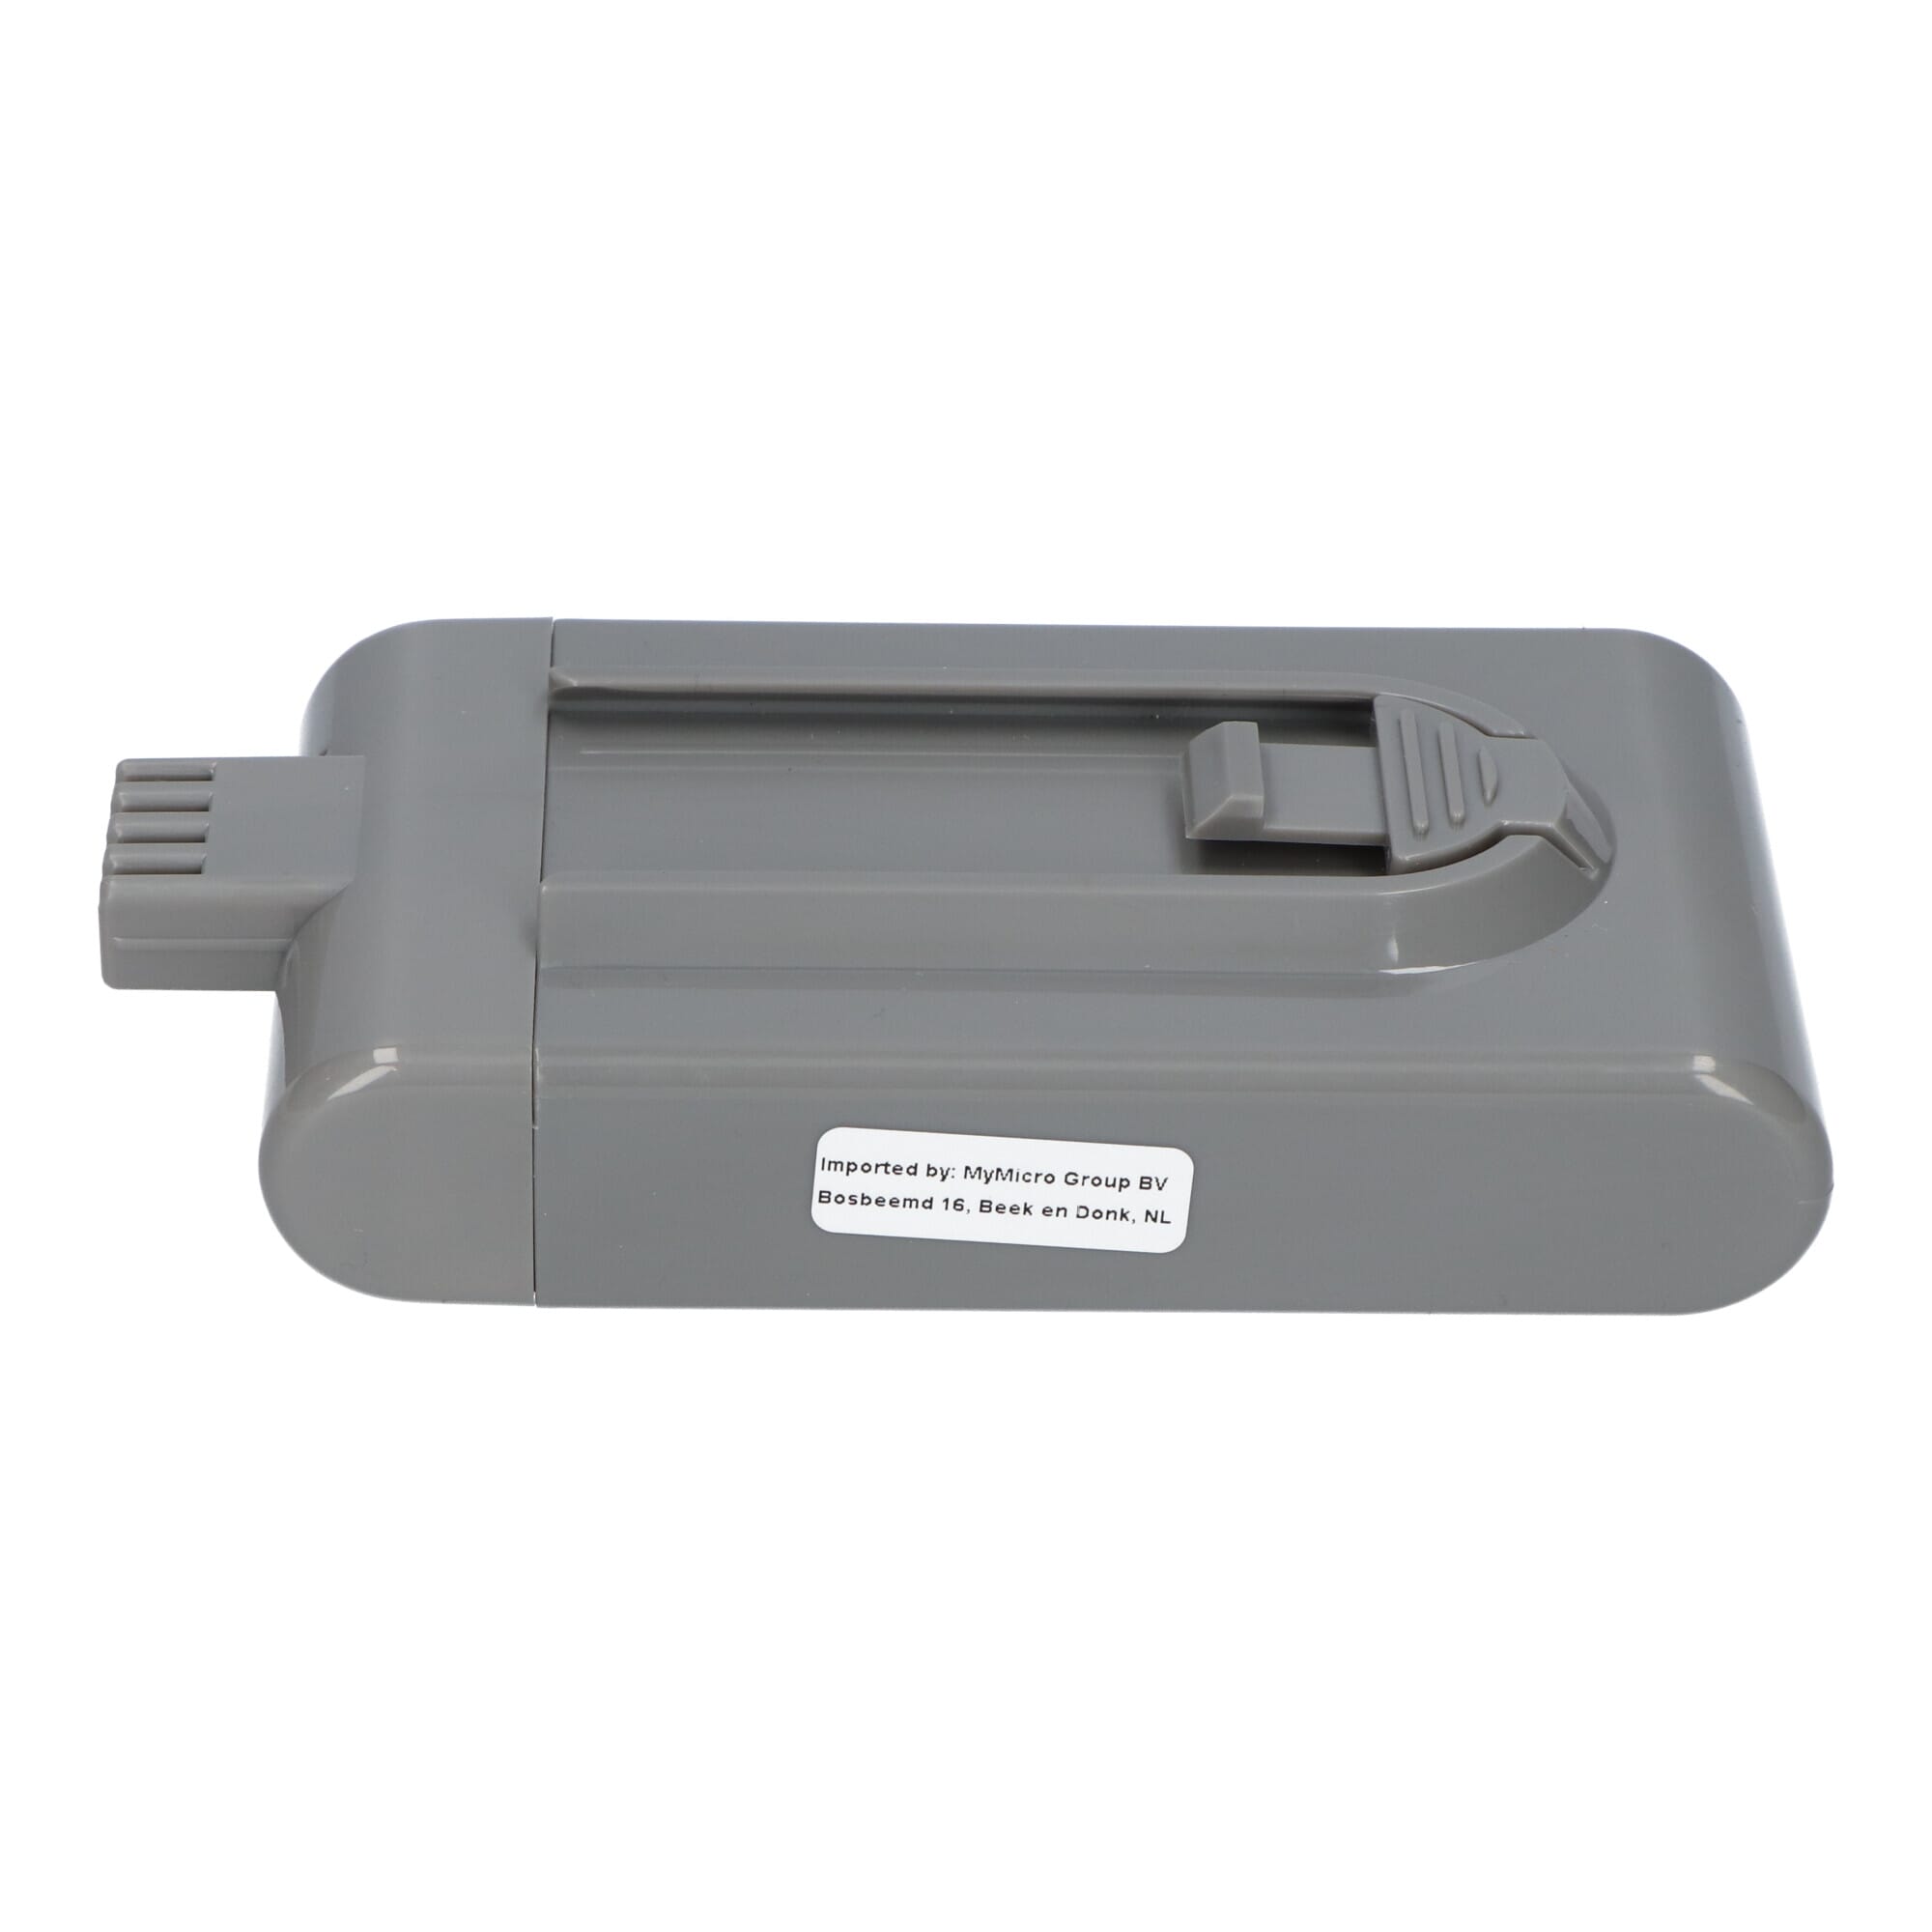 Stofzuiger Accu 2000mAh voor Dyson DC16 (P0685738) - ReplaceDirect.nl